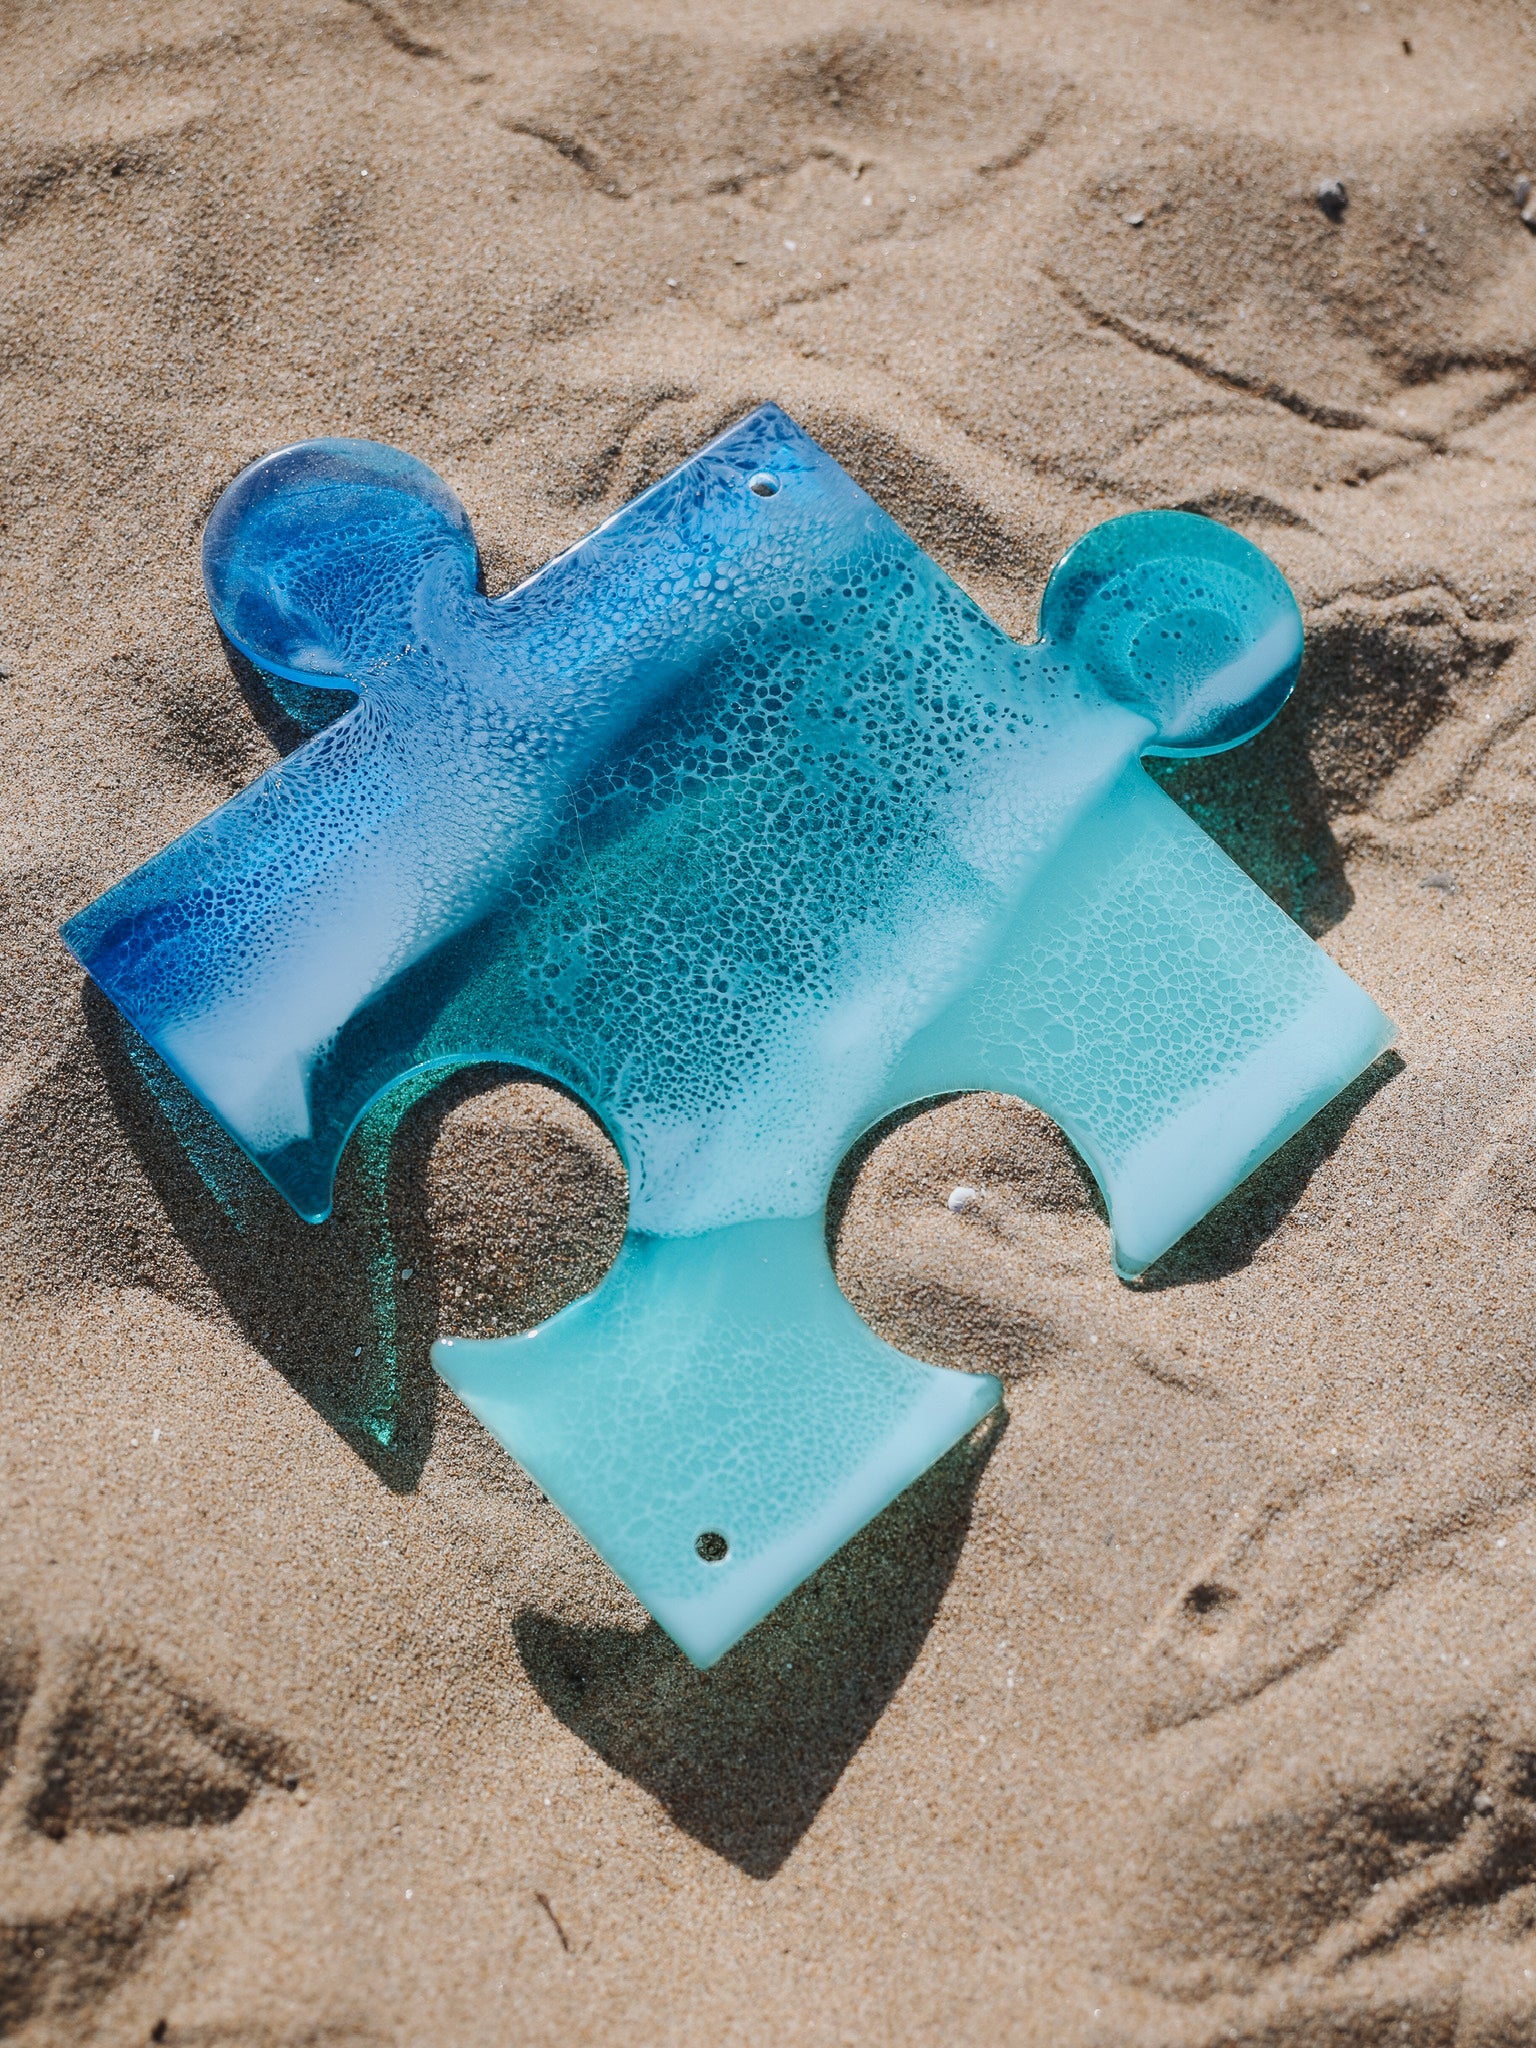 See-through, blue, stained glass ocean wave puzzle piece.